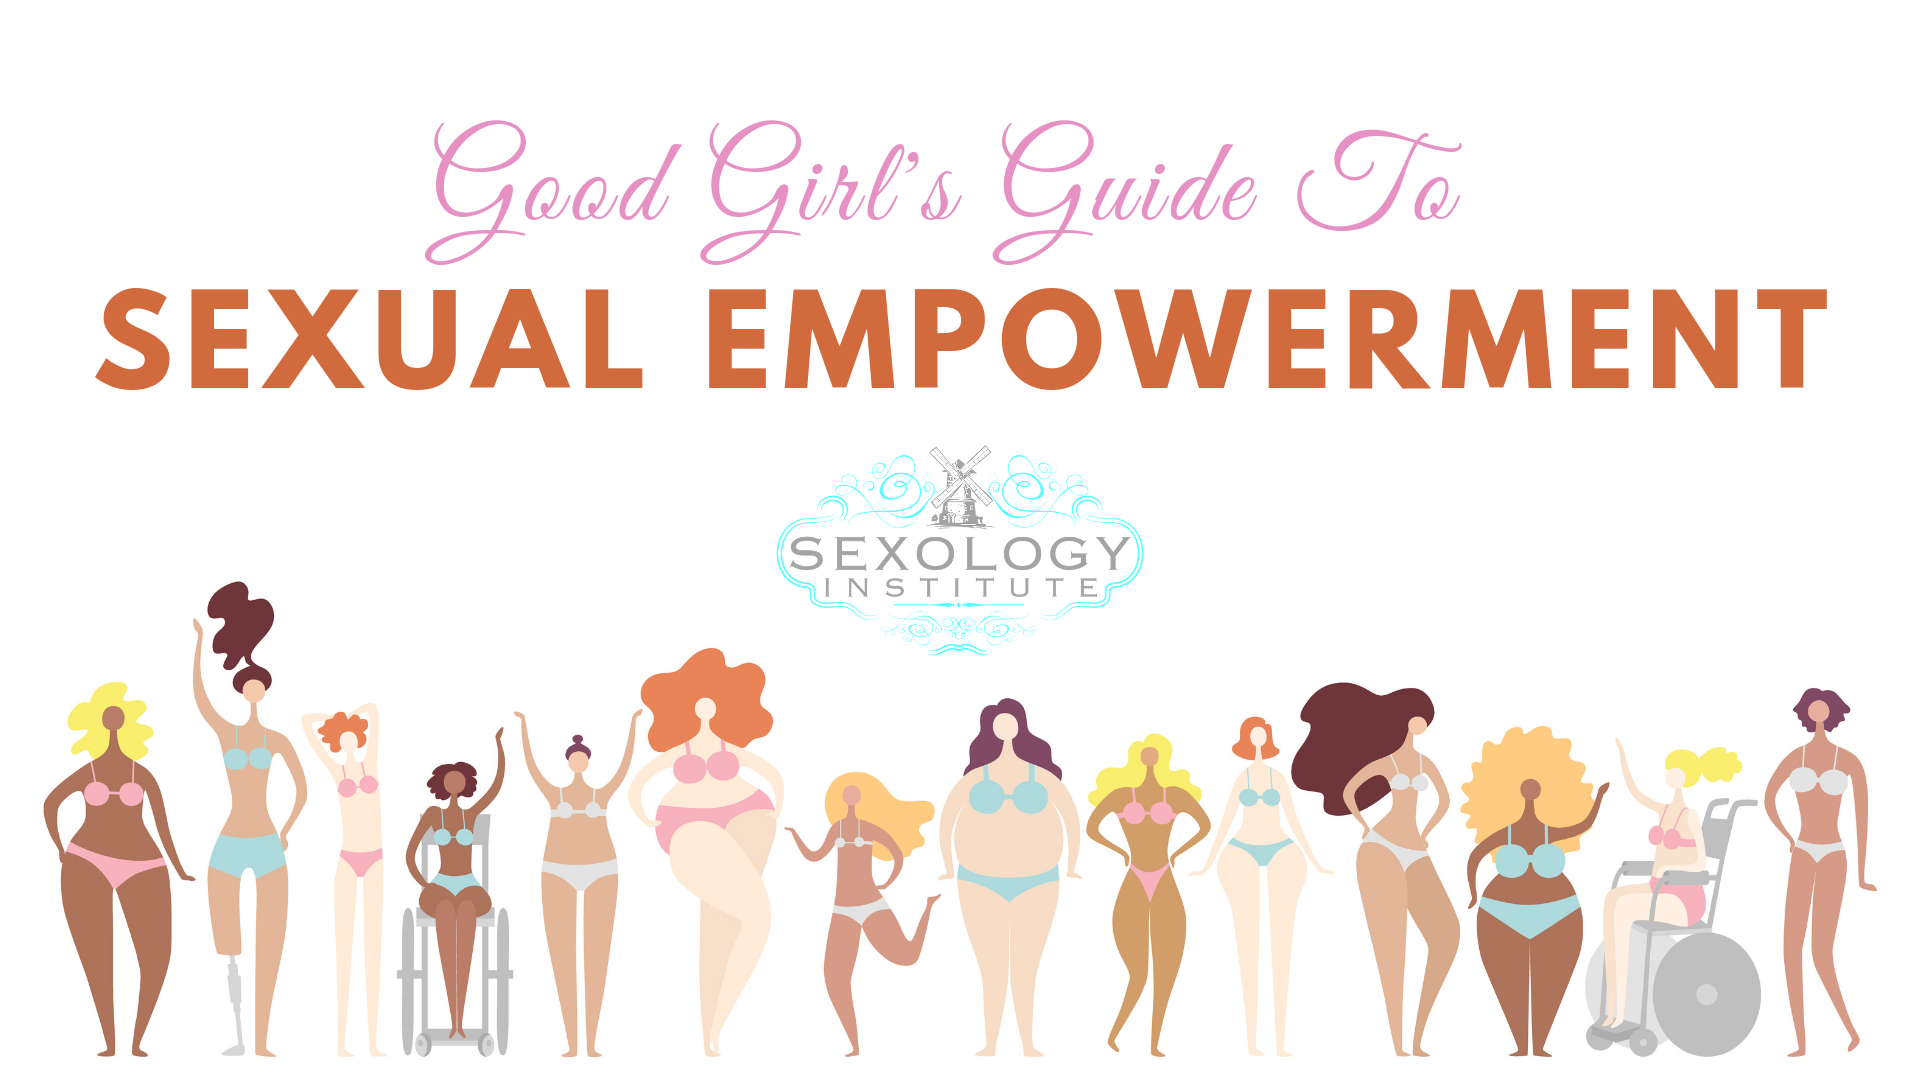 The Good Girl's Guide to Sexual Empowerment